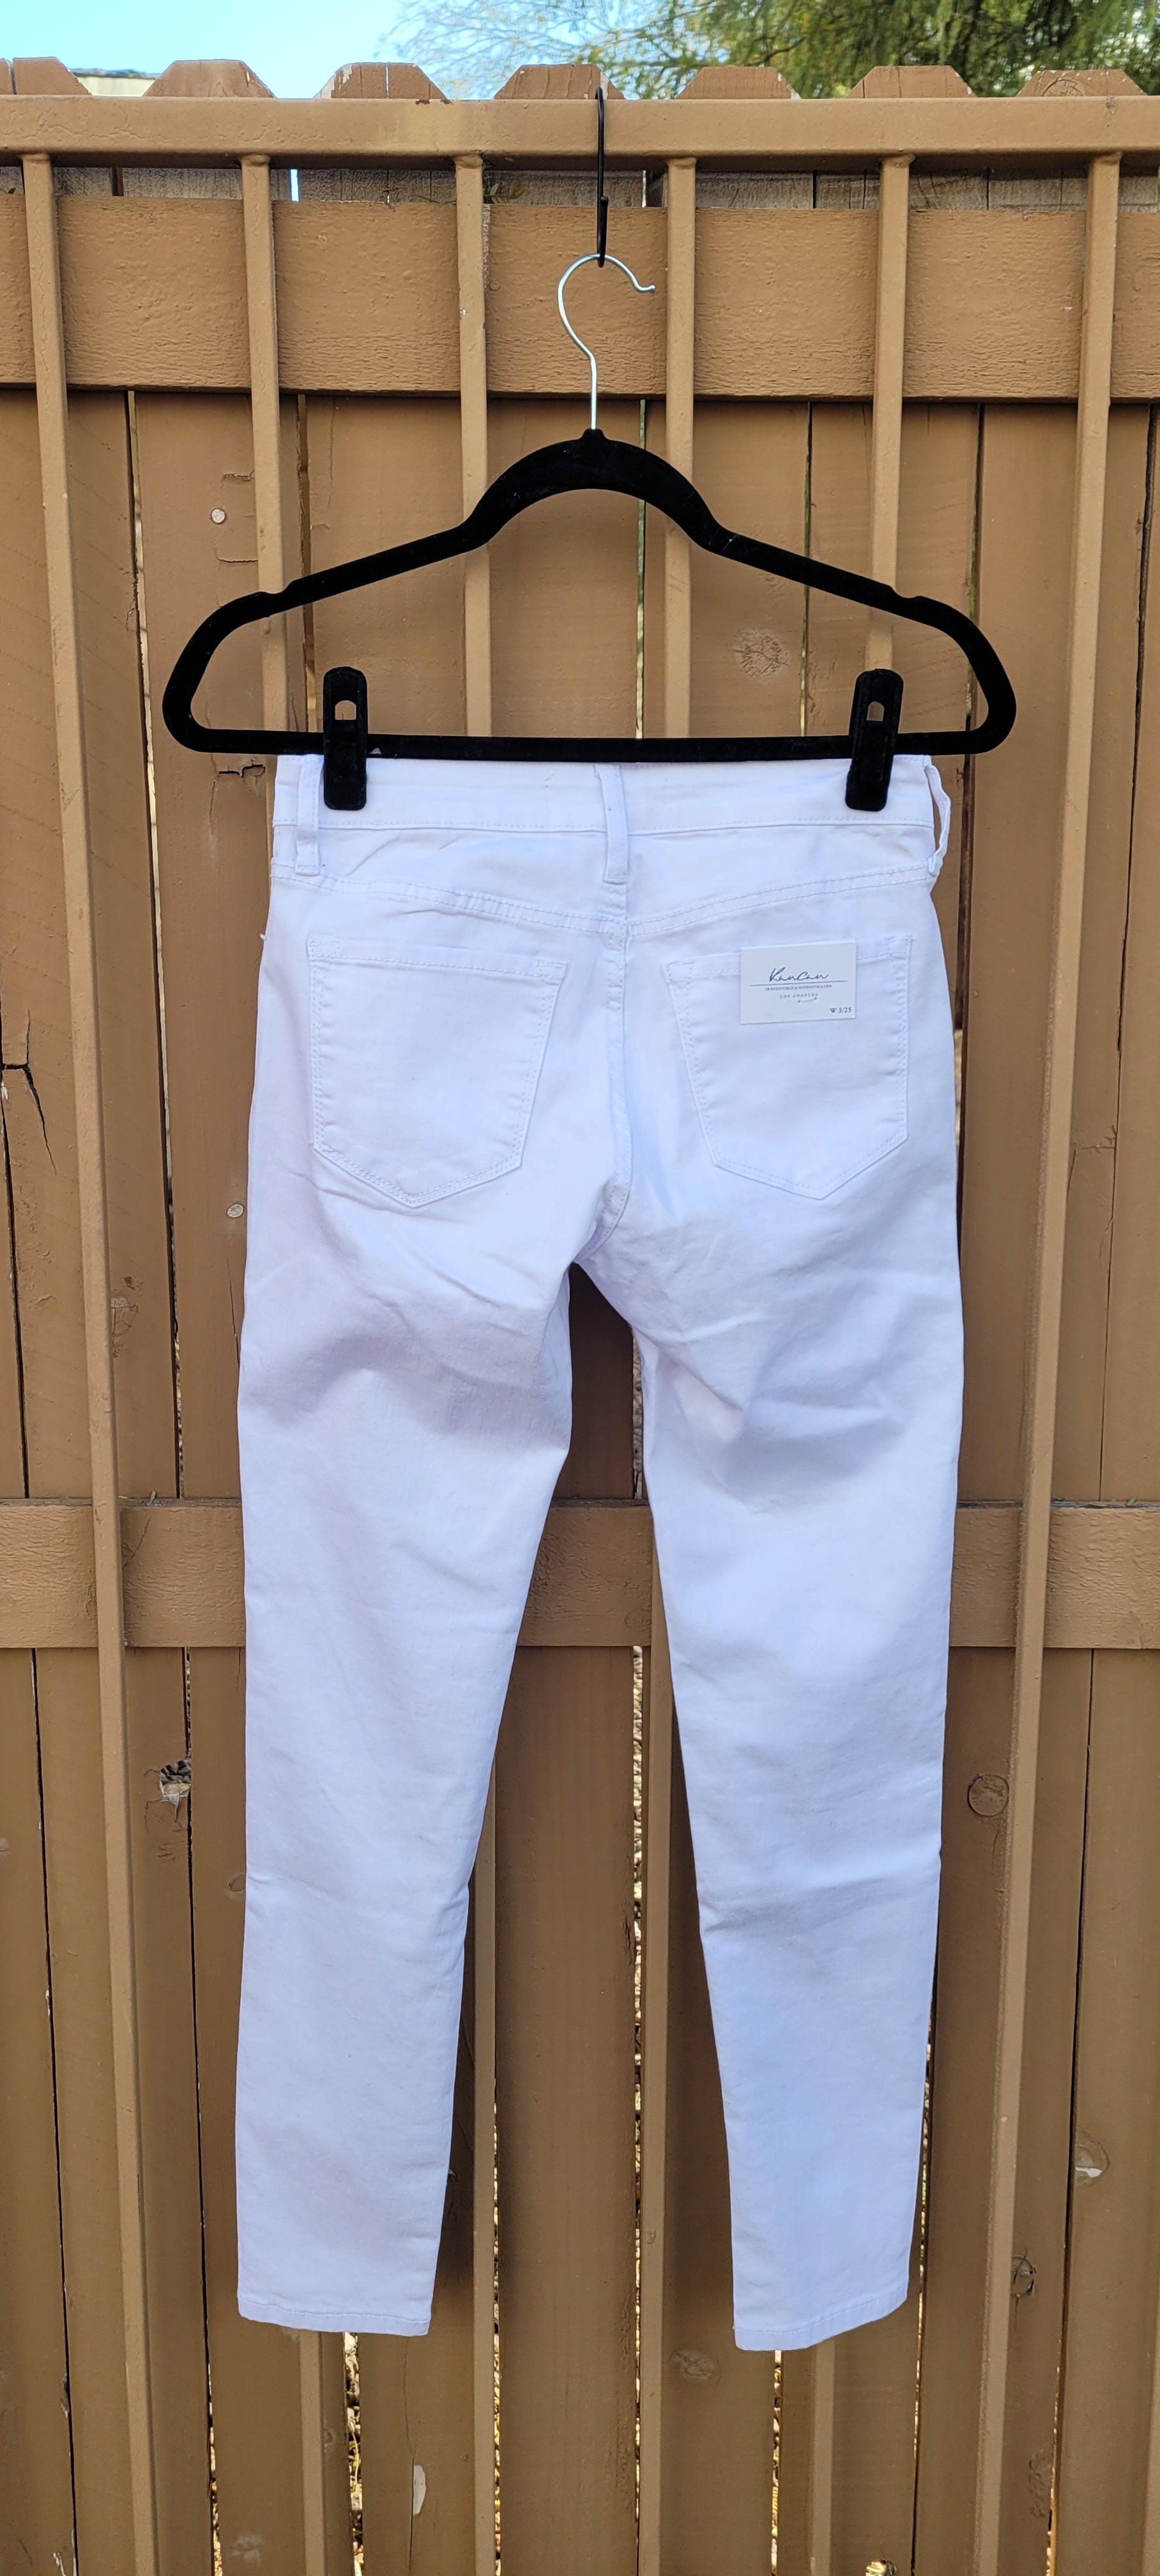 These cute white mid rise, ankle skinny jeans are nice and stretchy.  Please refer to photo below for stretch level. Great for everyday wear.  You can dress these jeans up or wear them as a casual piece.  You choose how you want to make a statement. Sizes 3/25, 5/26, 9/28, 11/29